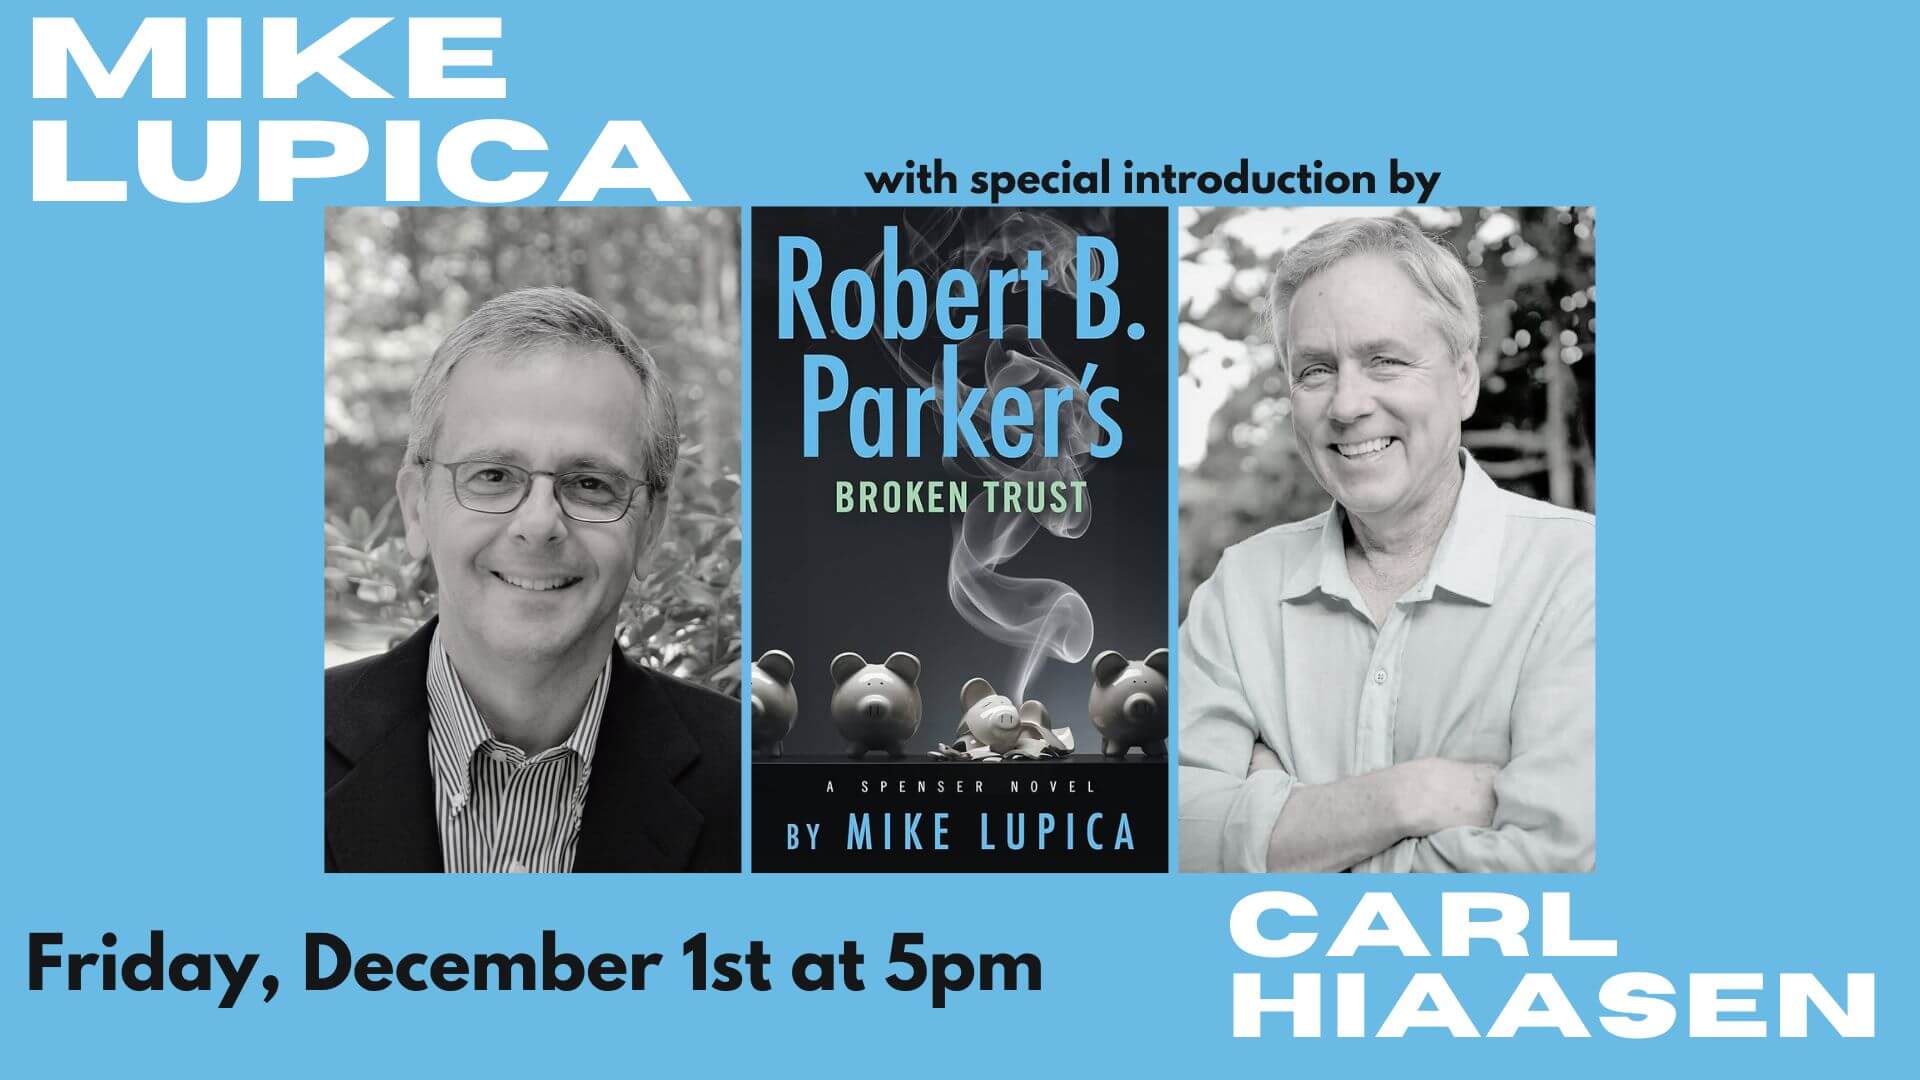 Mike Lupica presenting Robert B. Parker's Broken Trust with special guest Carl Hiassen